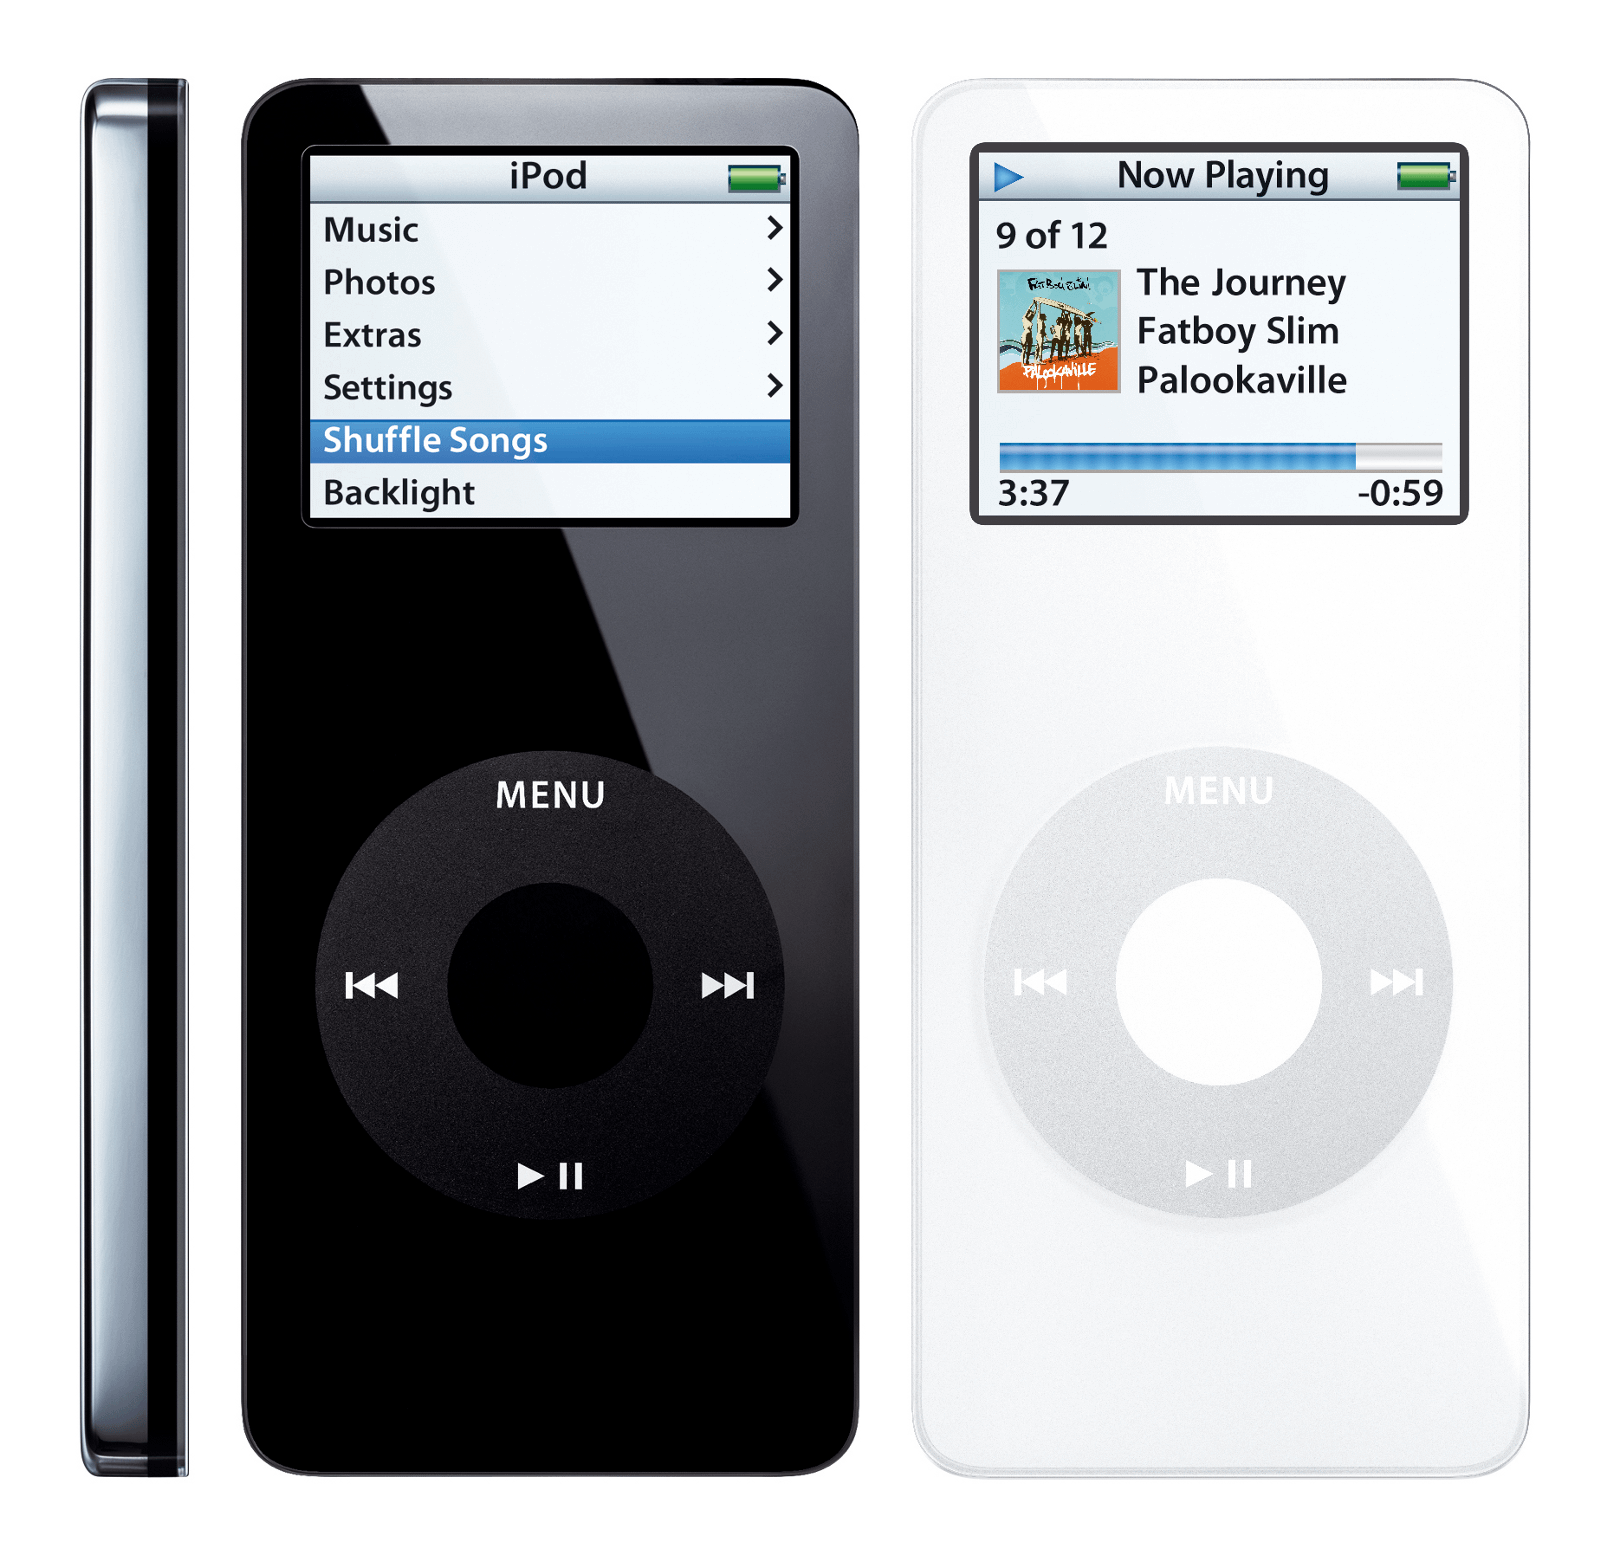 Apple iPod Nano 2nd Generation Technical Specifications